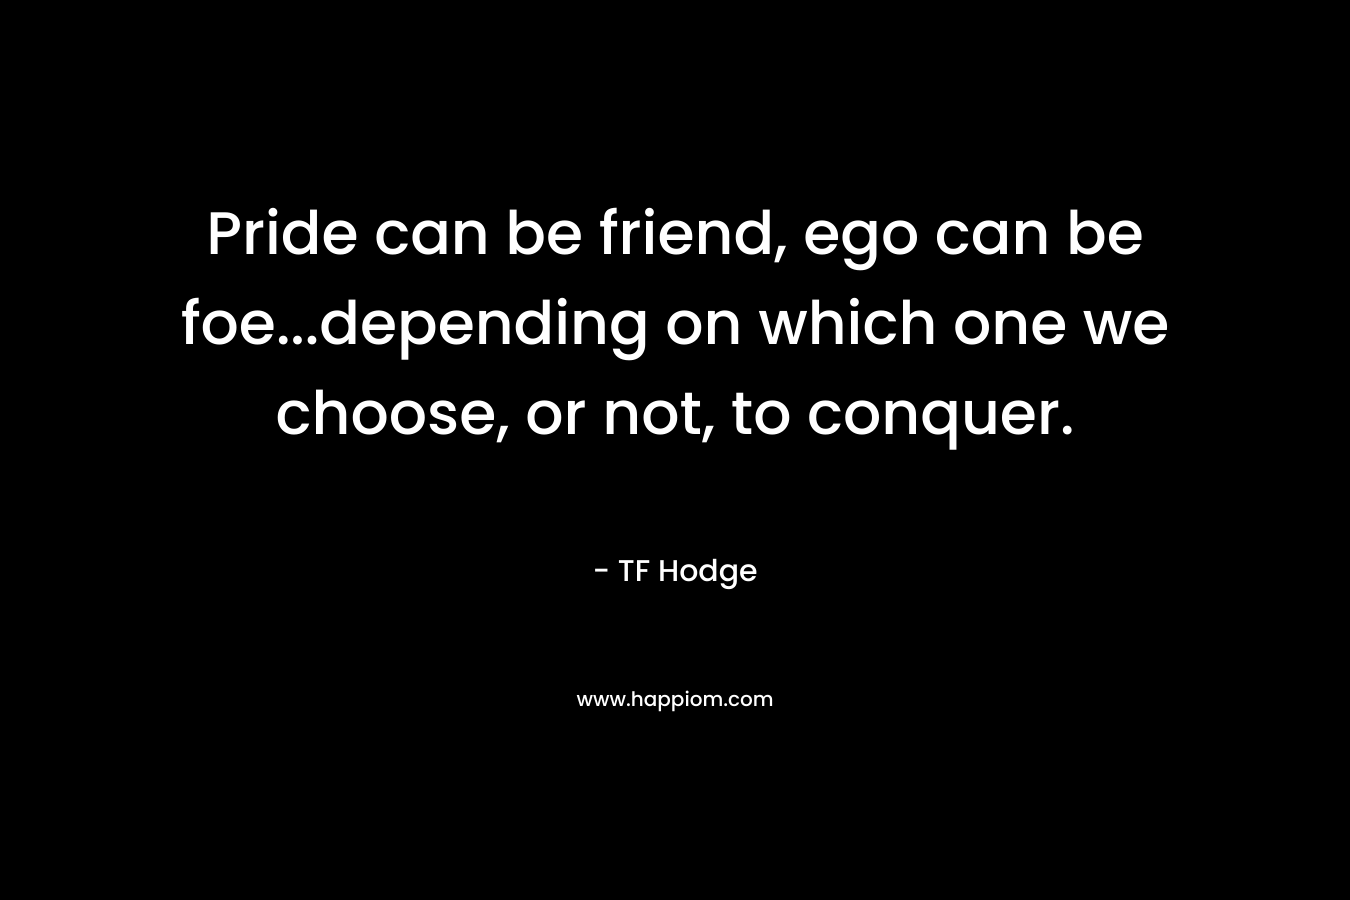 Pride can be friend, ego can be foe...depending on which one we choose, or not, to conquer.